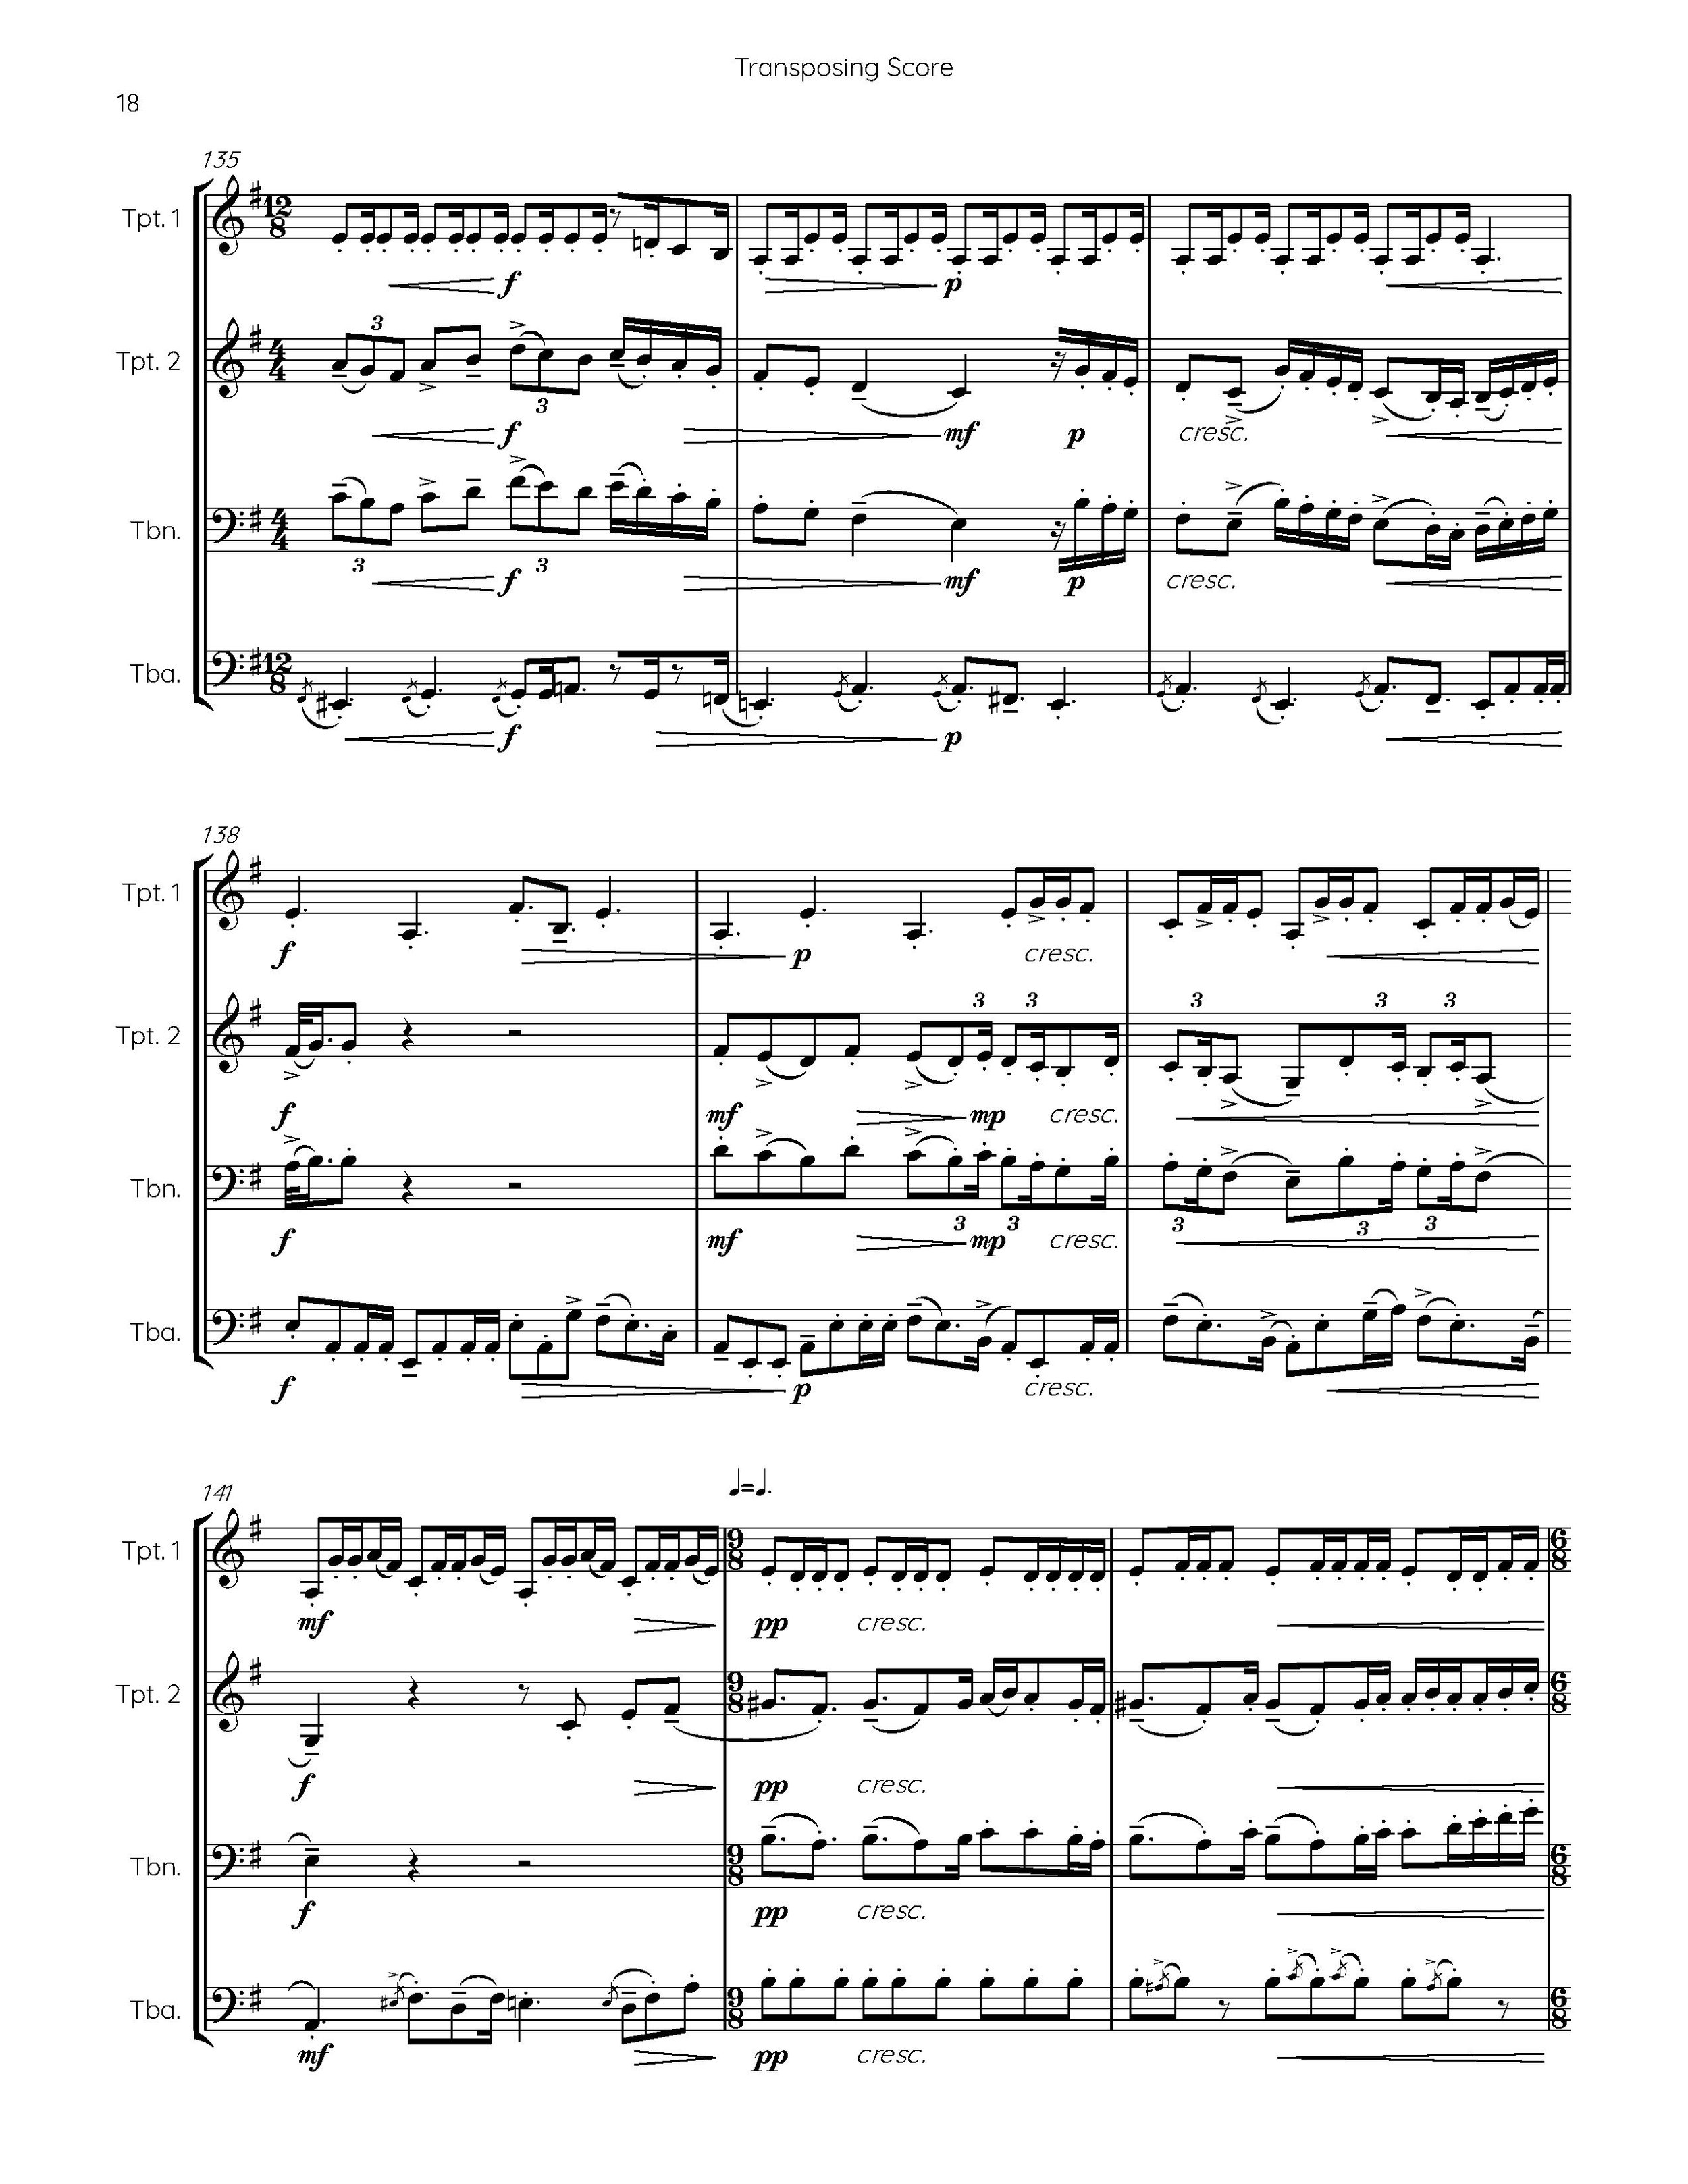 v1.2 Journey to the Ends of the World I. Horn Call - Transposing Score_Page_18.jpg